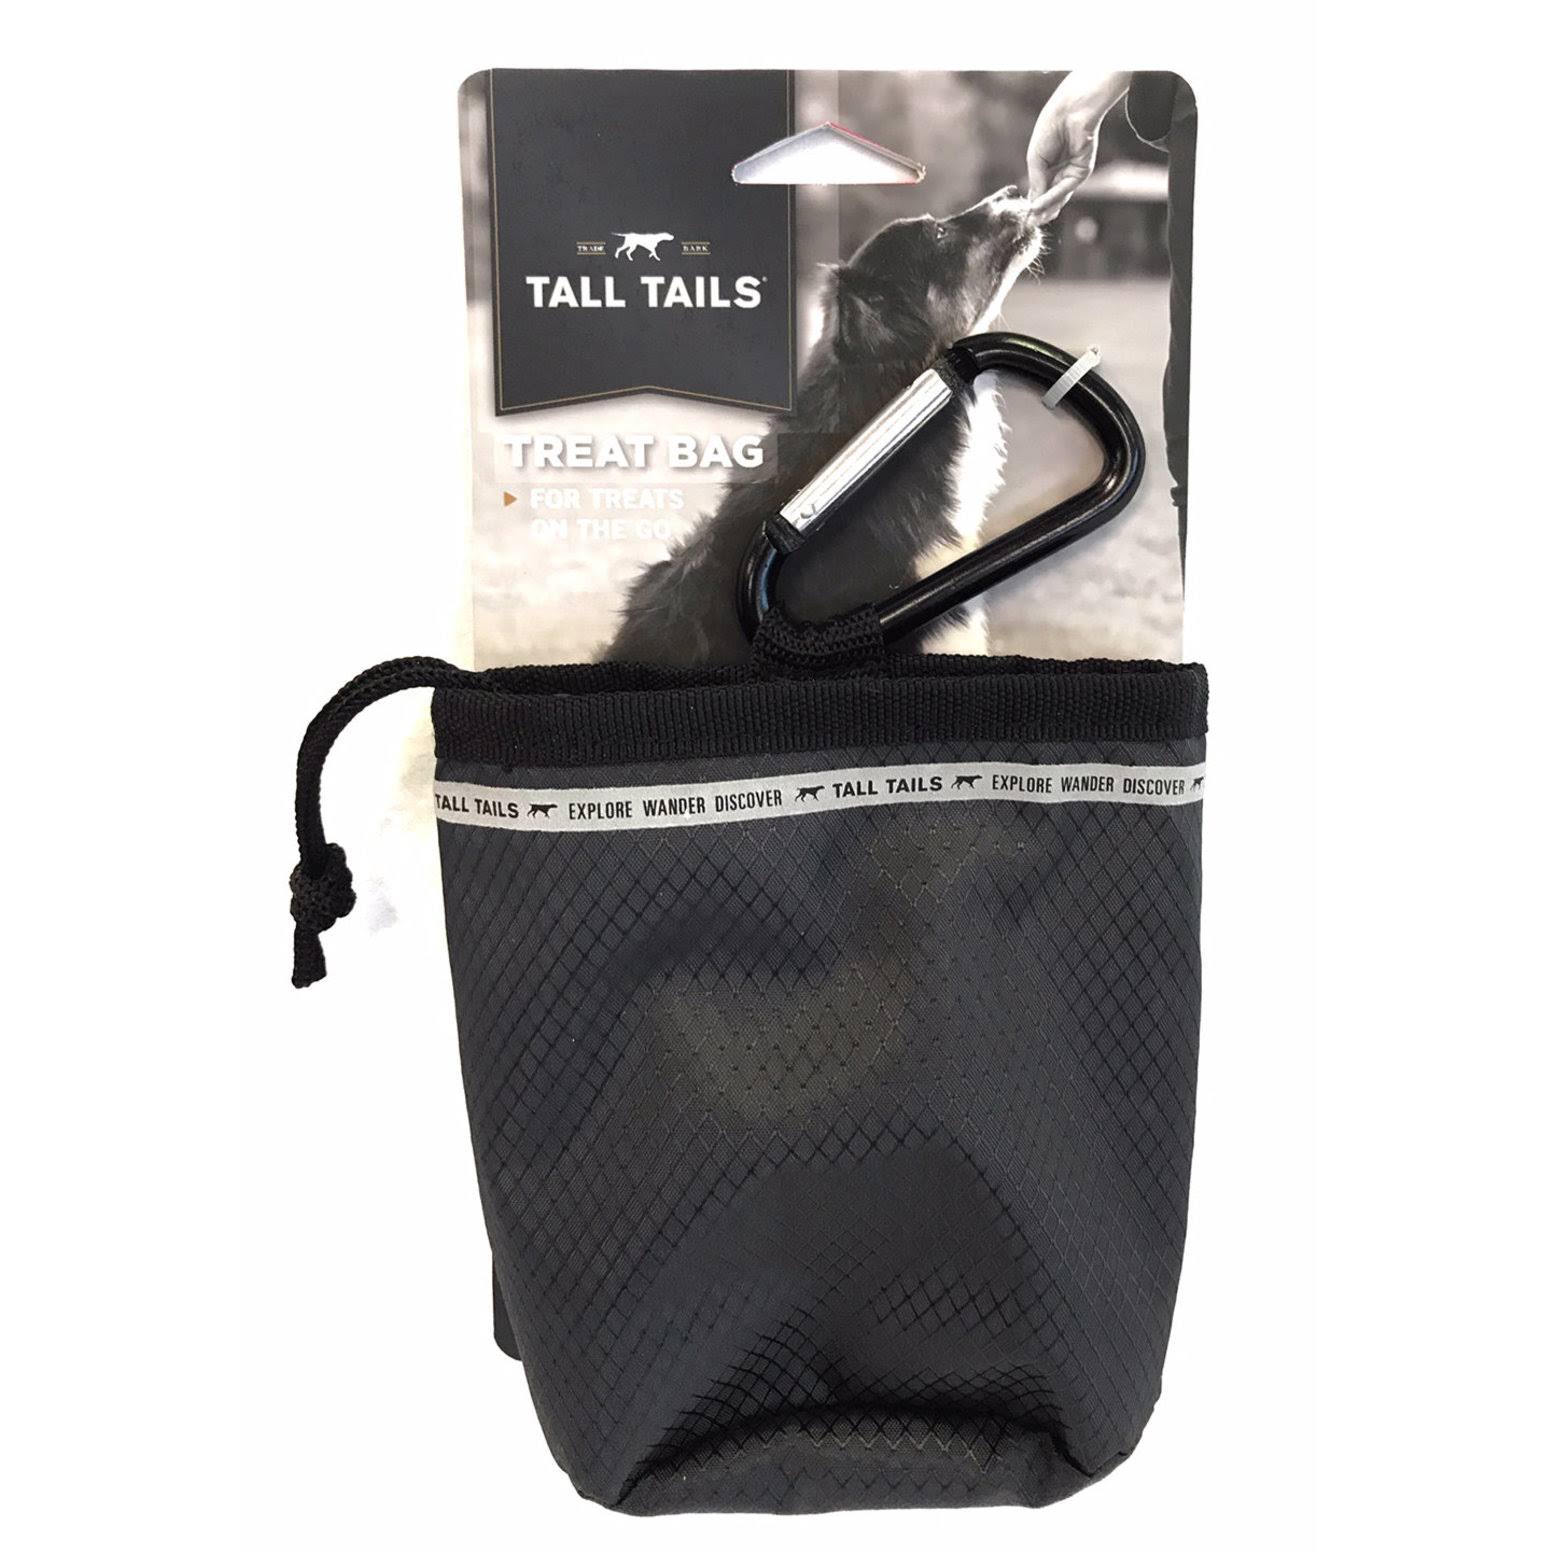 Tall Tails Treat Bag in Grey